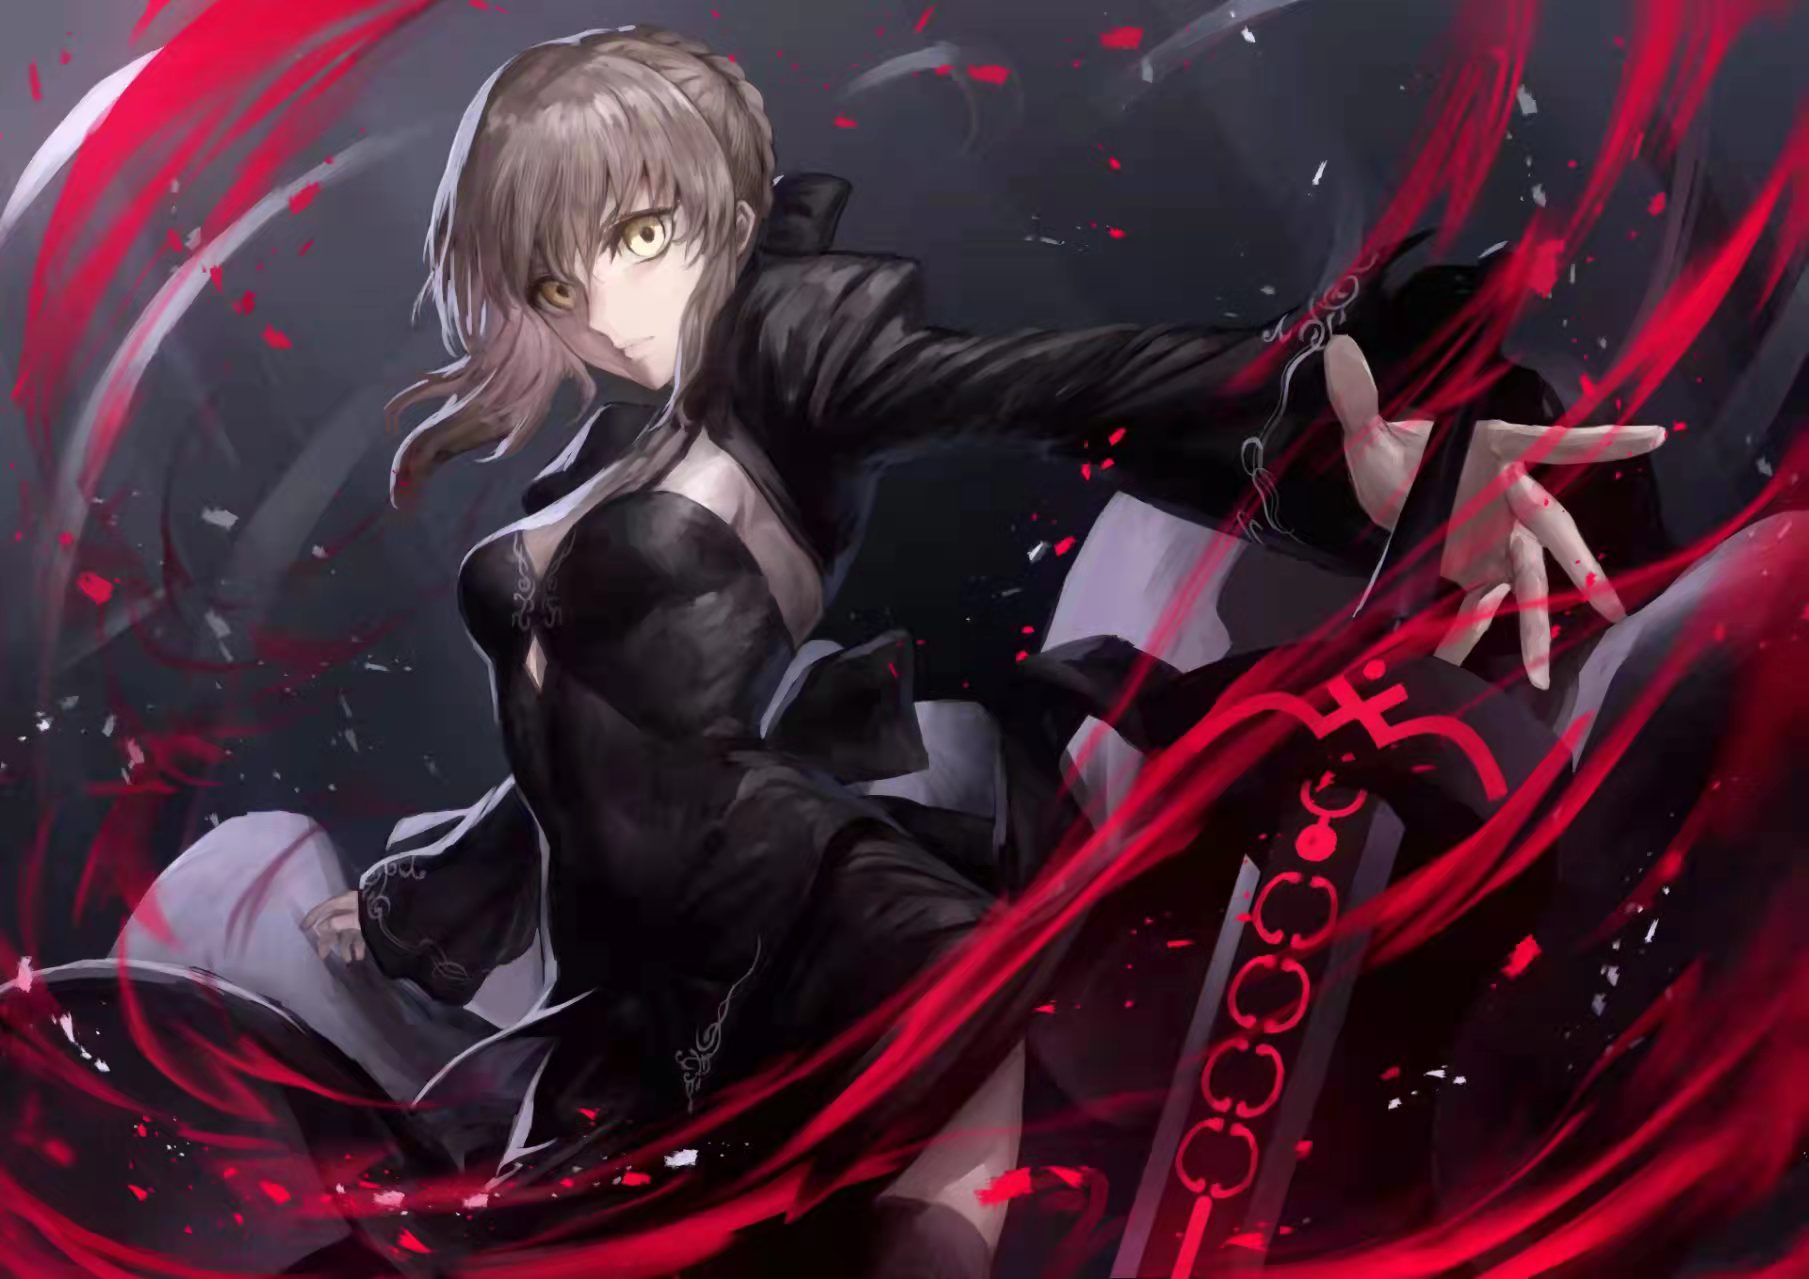 Saber Fate Series Fate Grand Order Saber Alter Sword Women With Swords Fate Stay Night Fate Stay